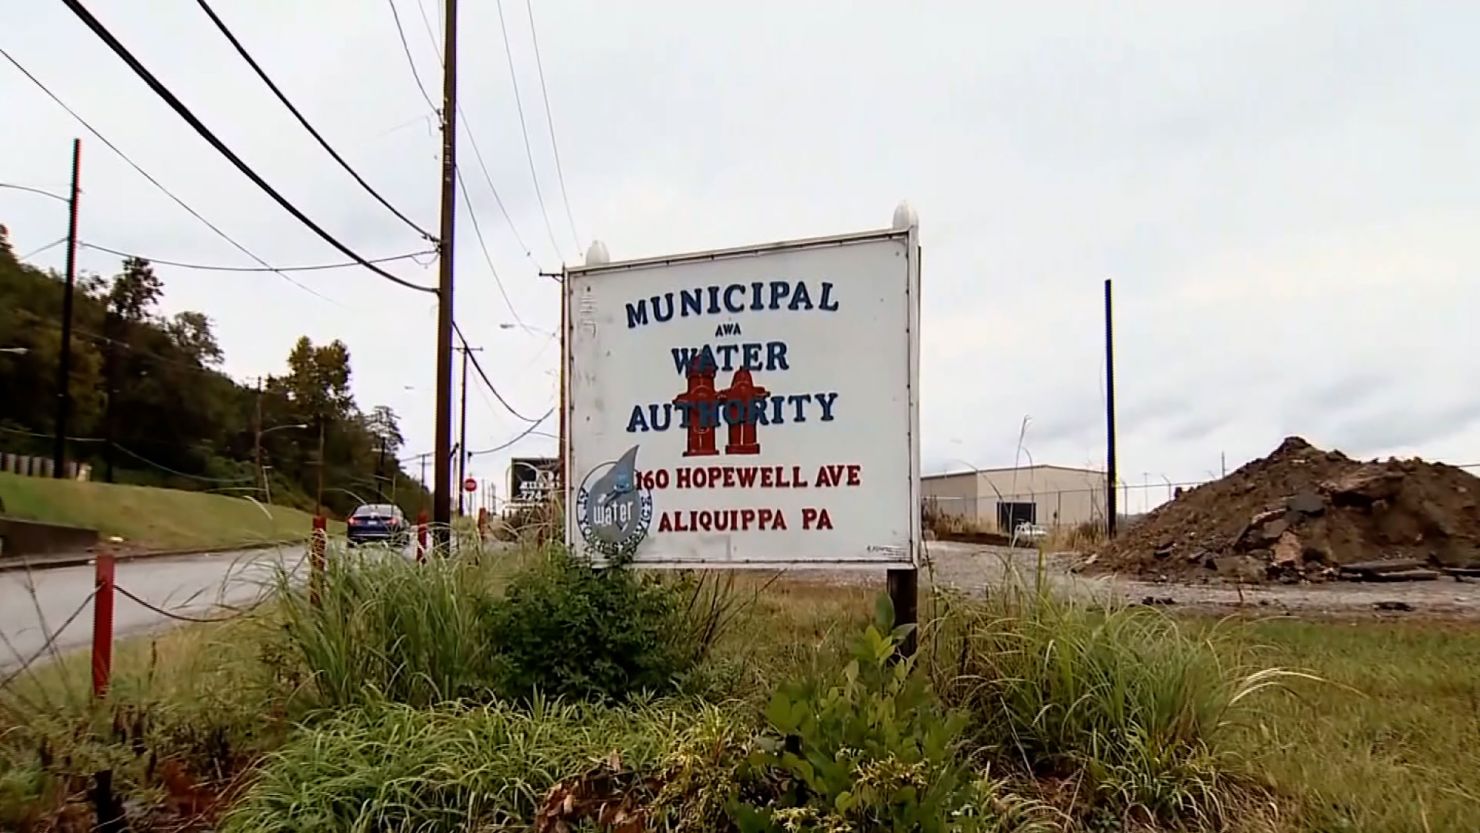 A sign for the Aliquippa Municipal Water Authority in Aliquippa, Pennsylvania.